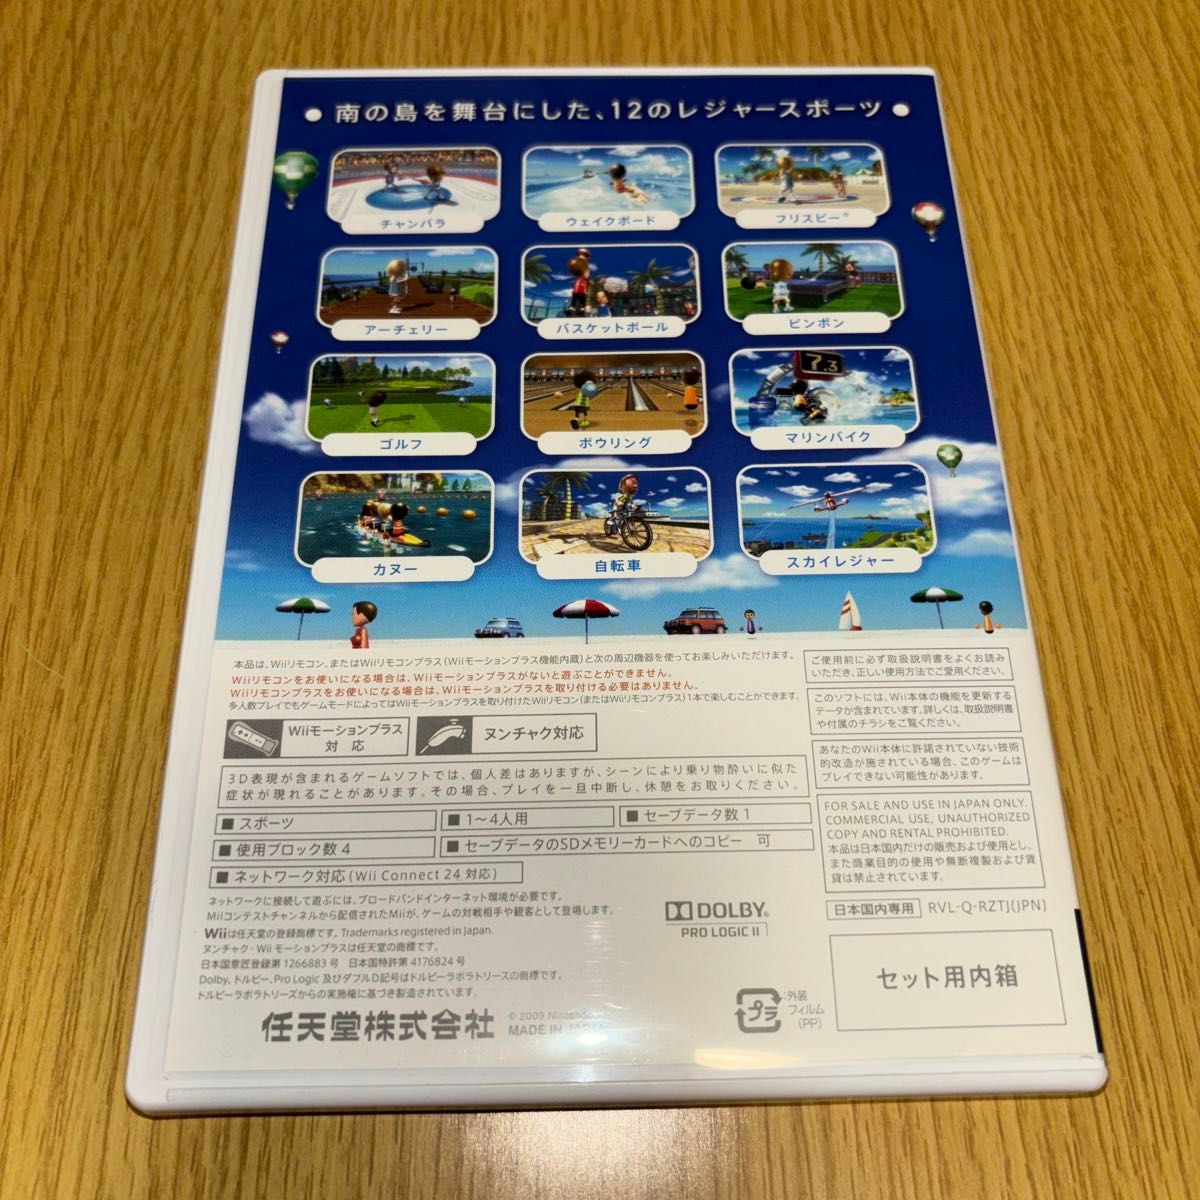 Wiiスポーツリゾート